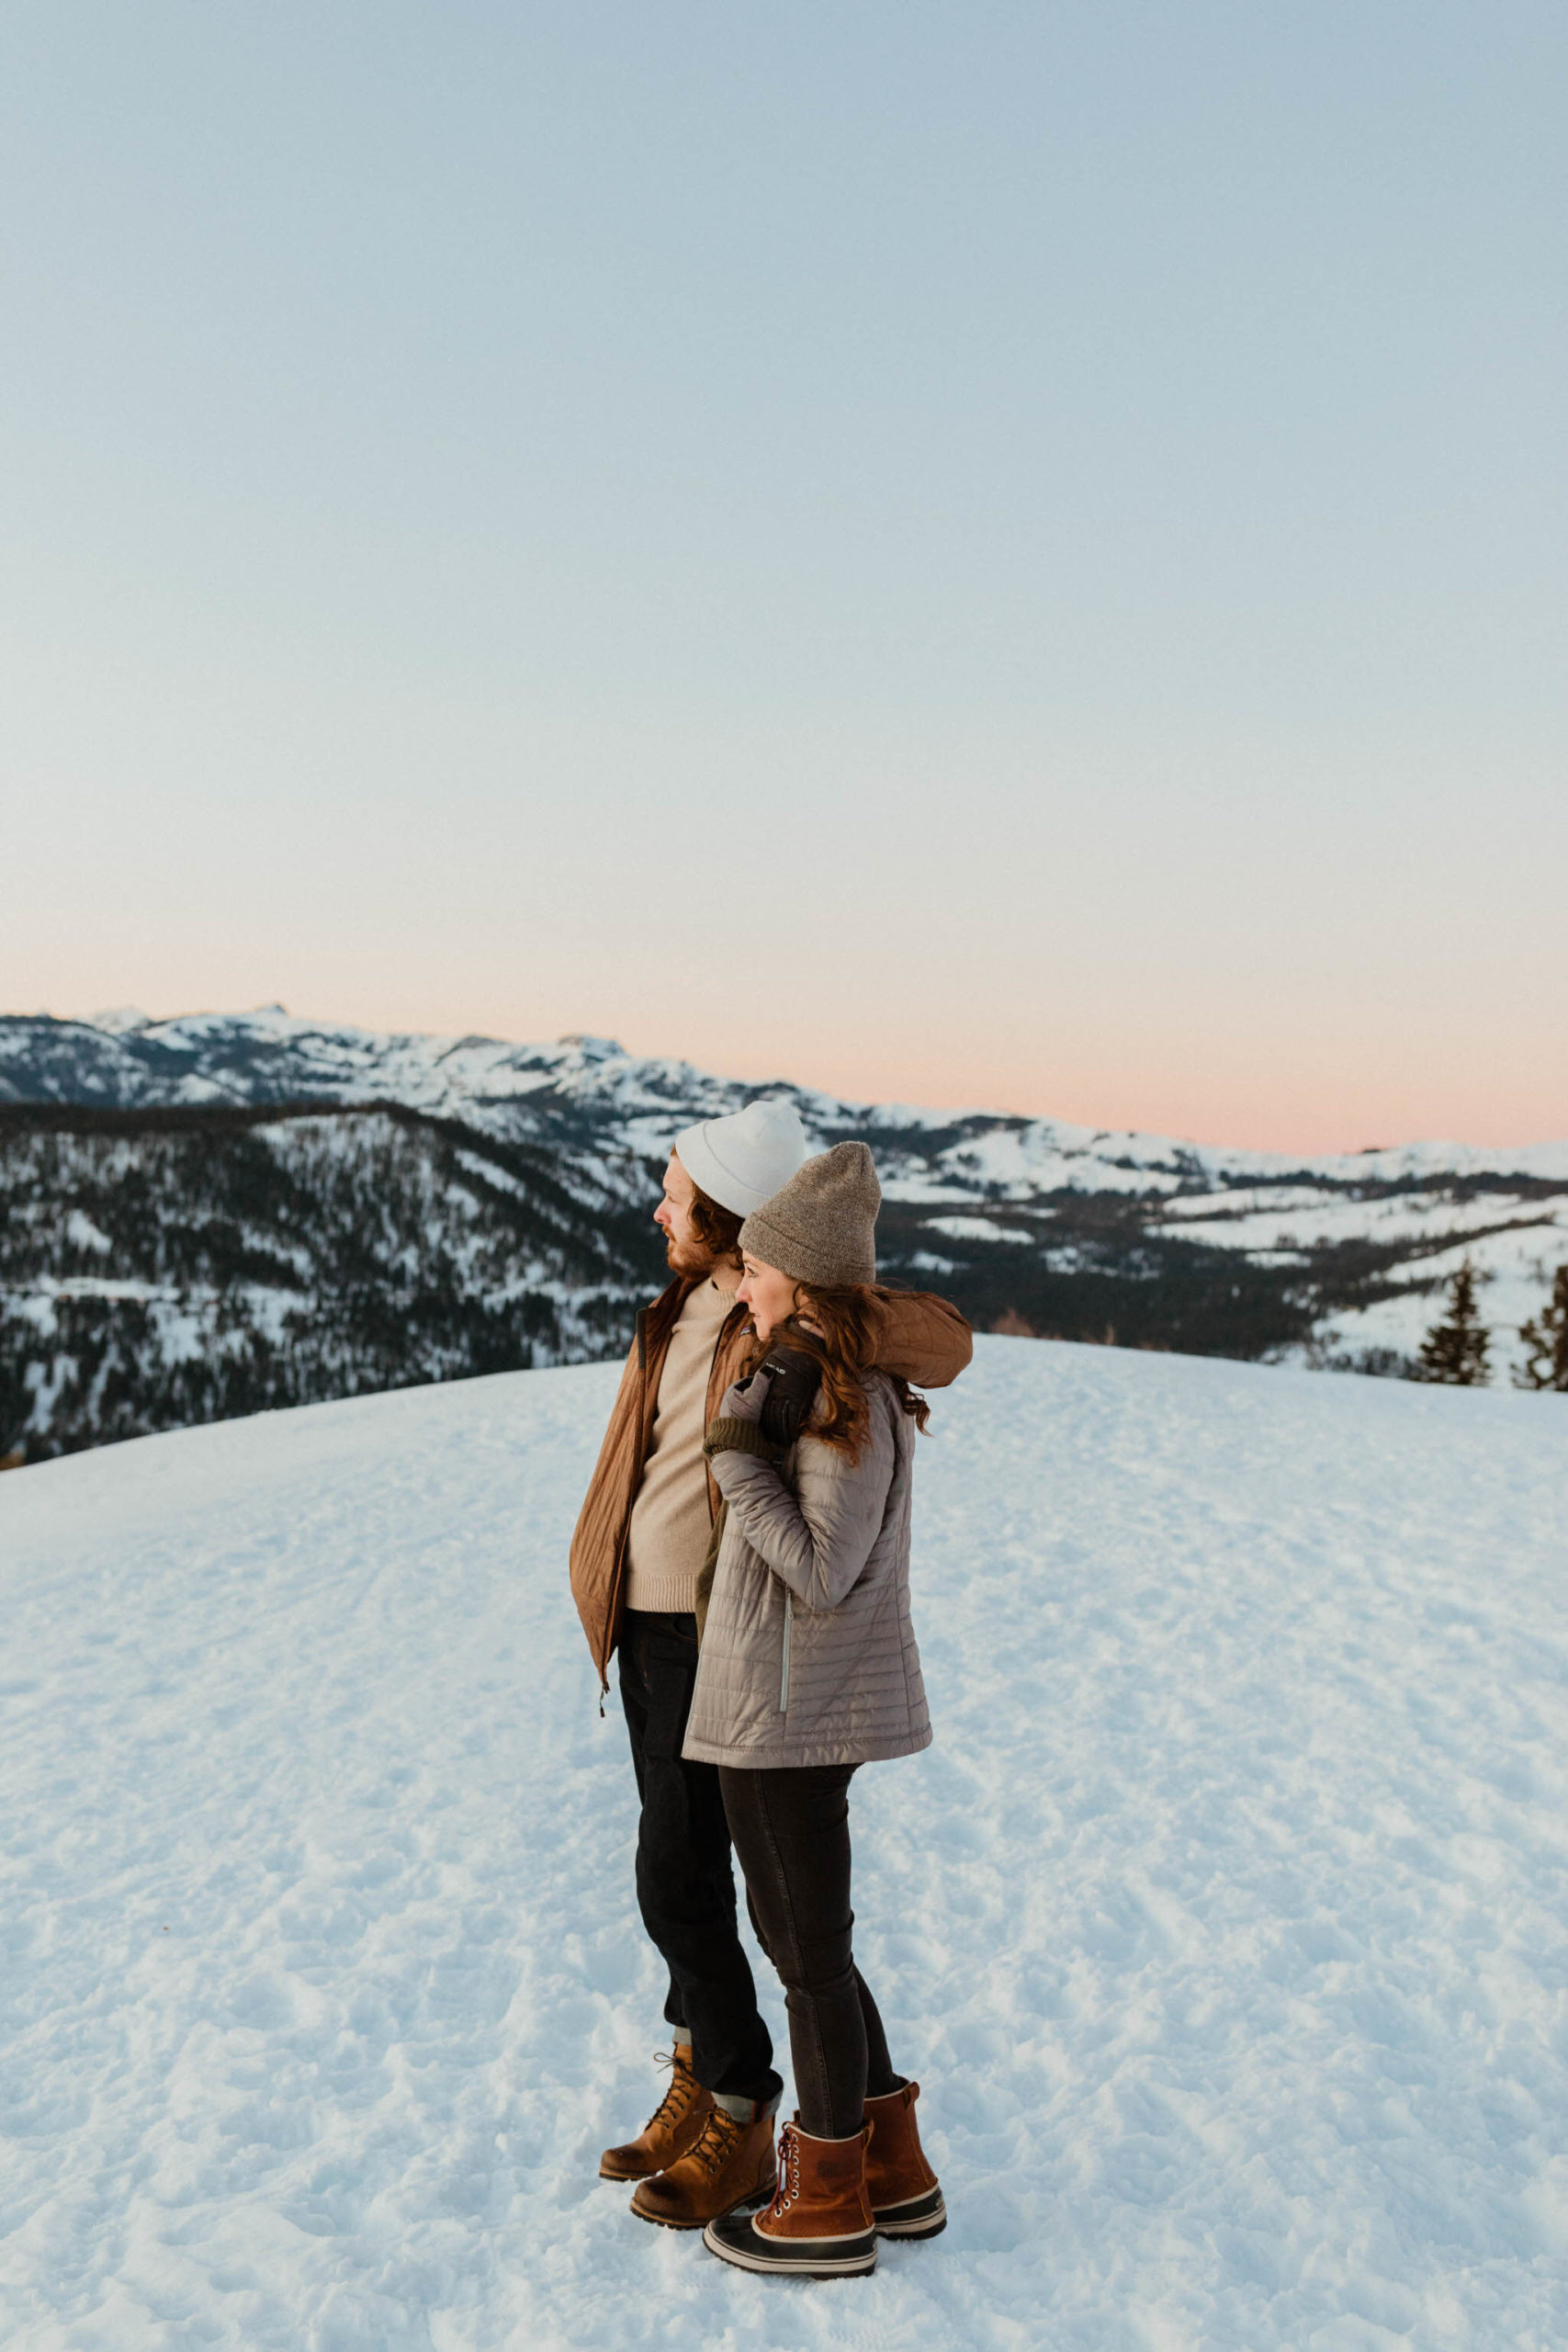 SUNRISE ENGAGEMENT SESSION IN THE SNOWY MOUNTAINS OF TRUCKEE, CALIFORNIA